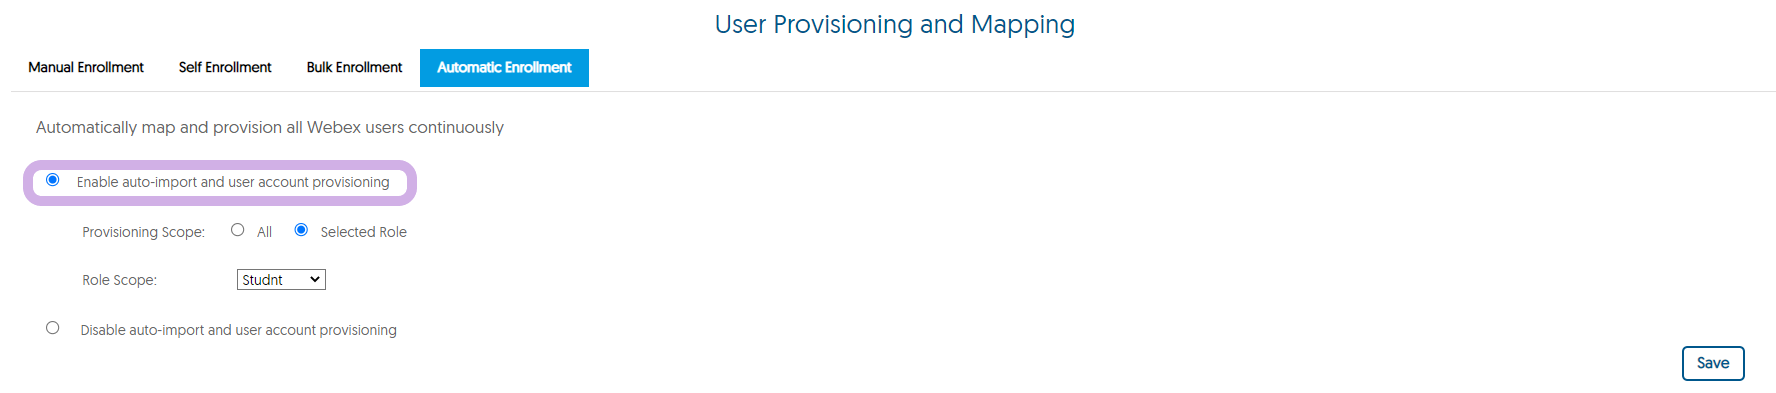 The User Provisioning and Mapping panel for Webex with Enable auto-import and user account provisioning selected from Automatic Imports.